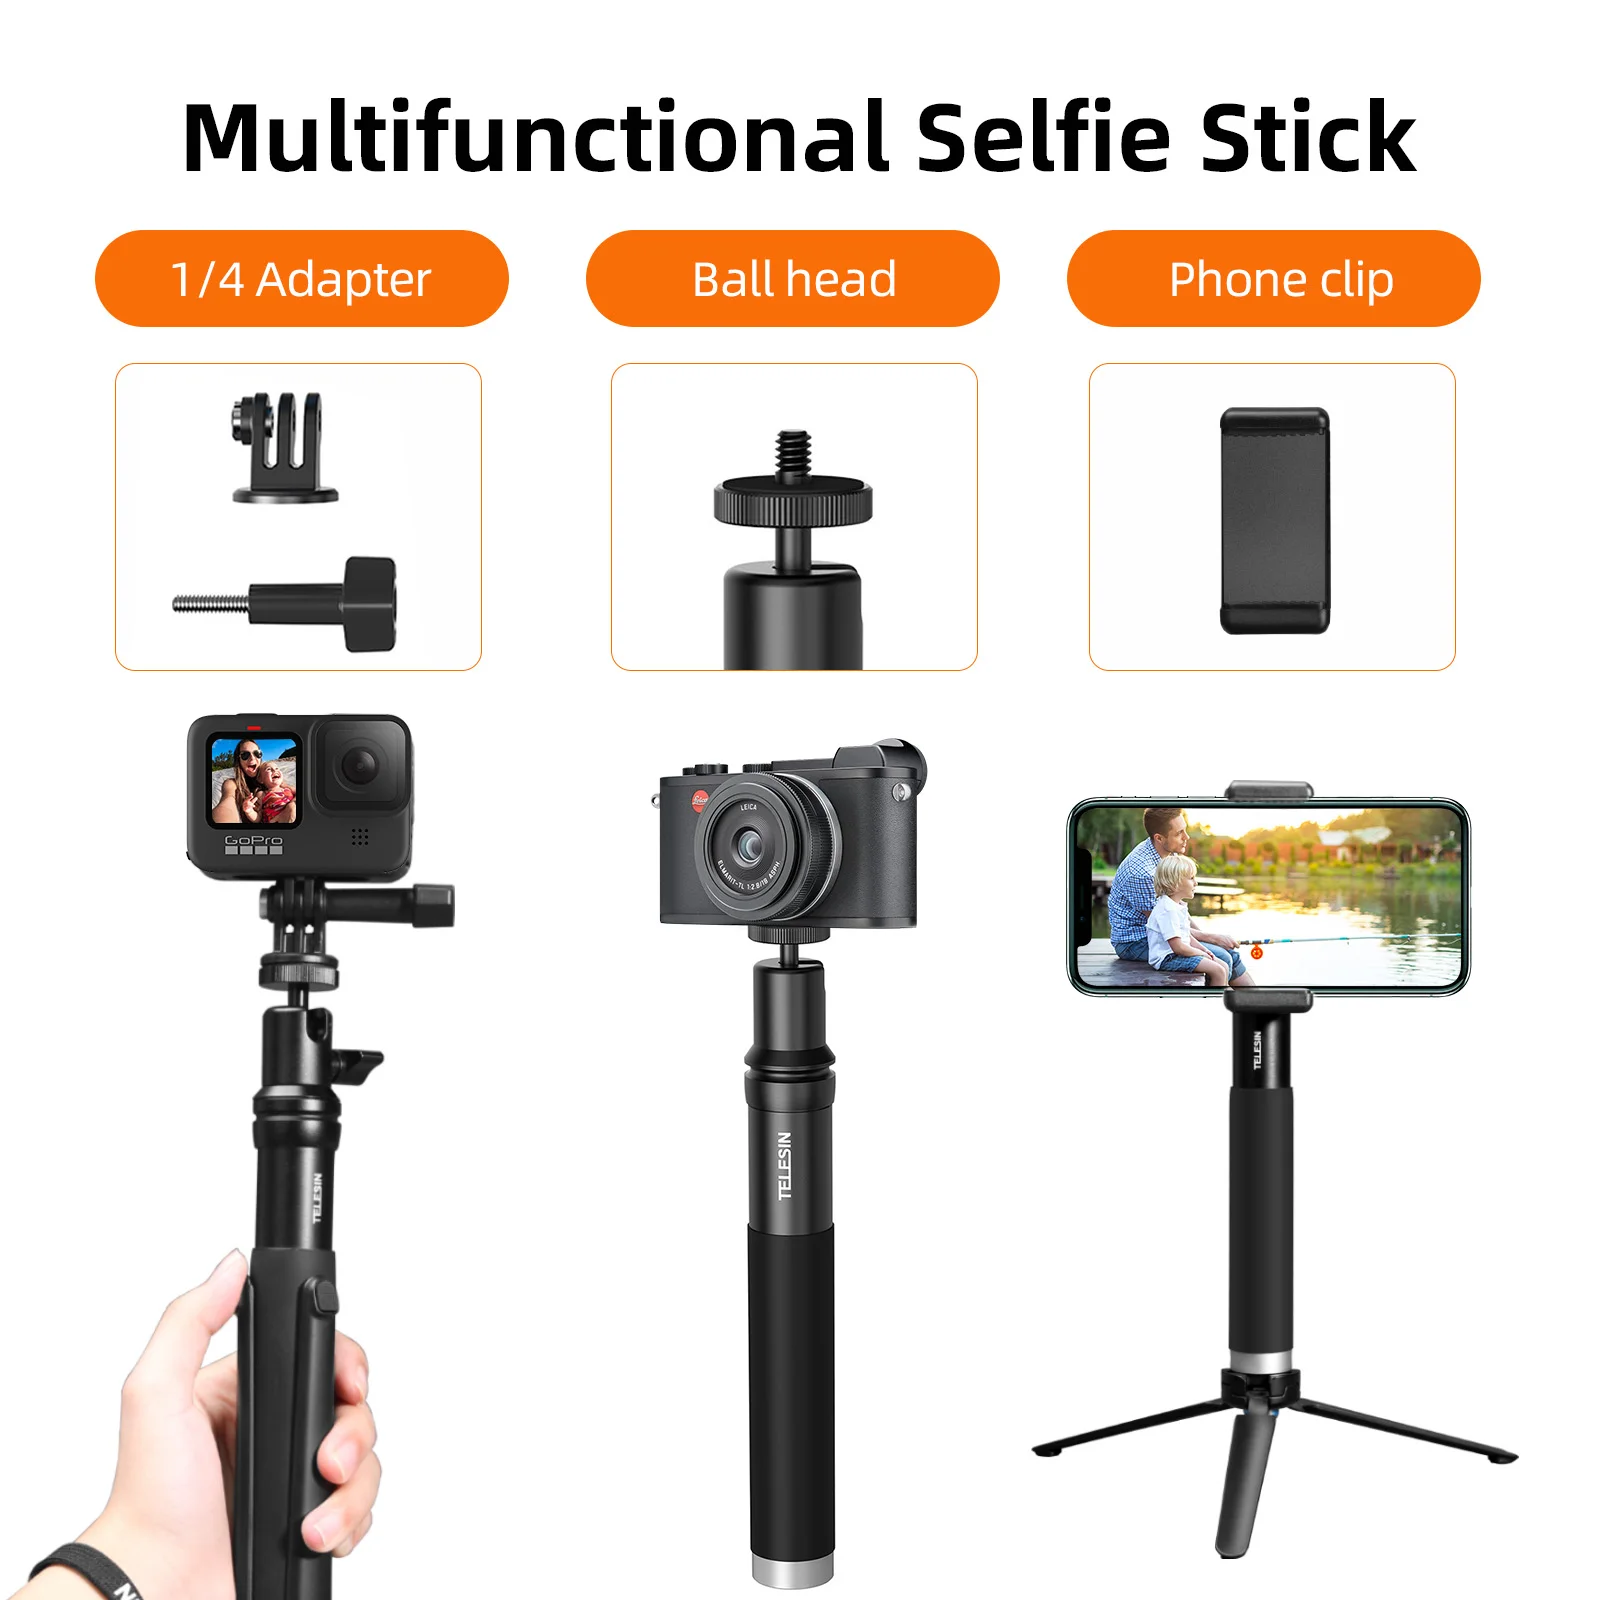 Not included Tripod TELESIN 0.9m Selfie Sticks Aluminum alloy with 360 Roation Ball Head for Gopro Max Hero 9 8 7 6 5 Action Cameras Smartphones DSLR,with Phone Holder and Adapter